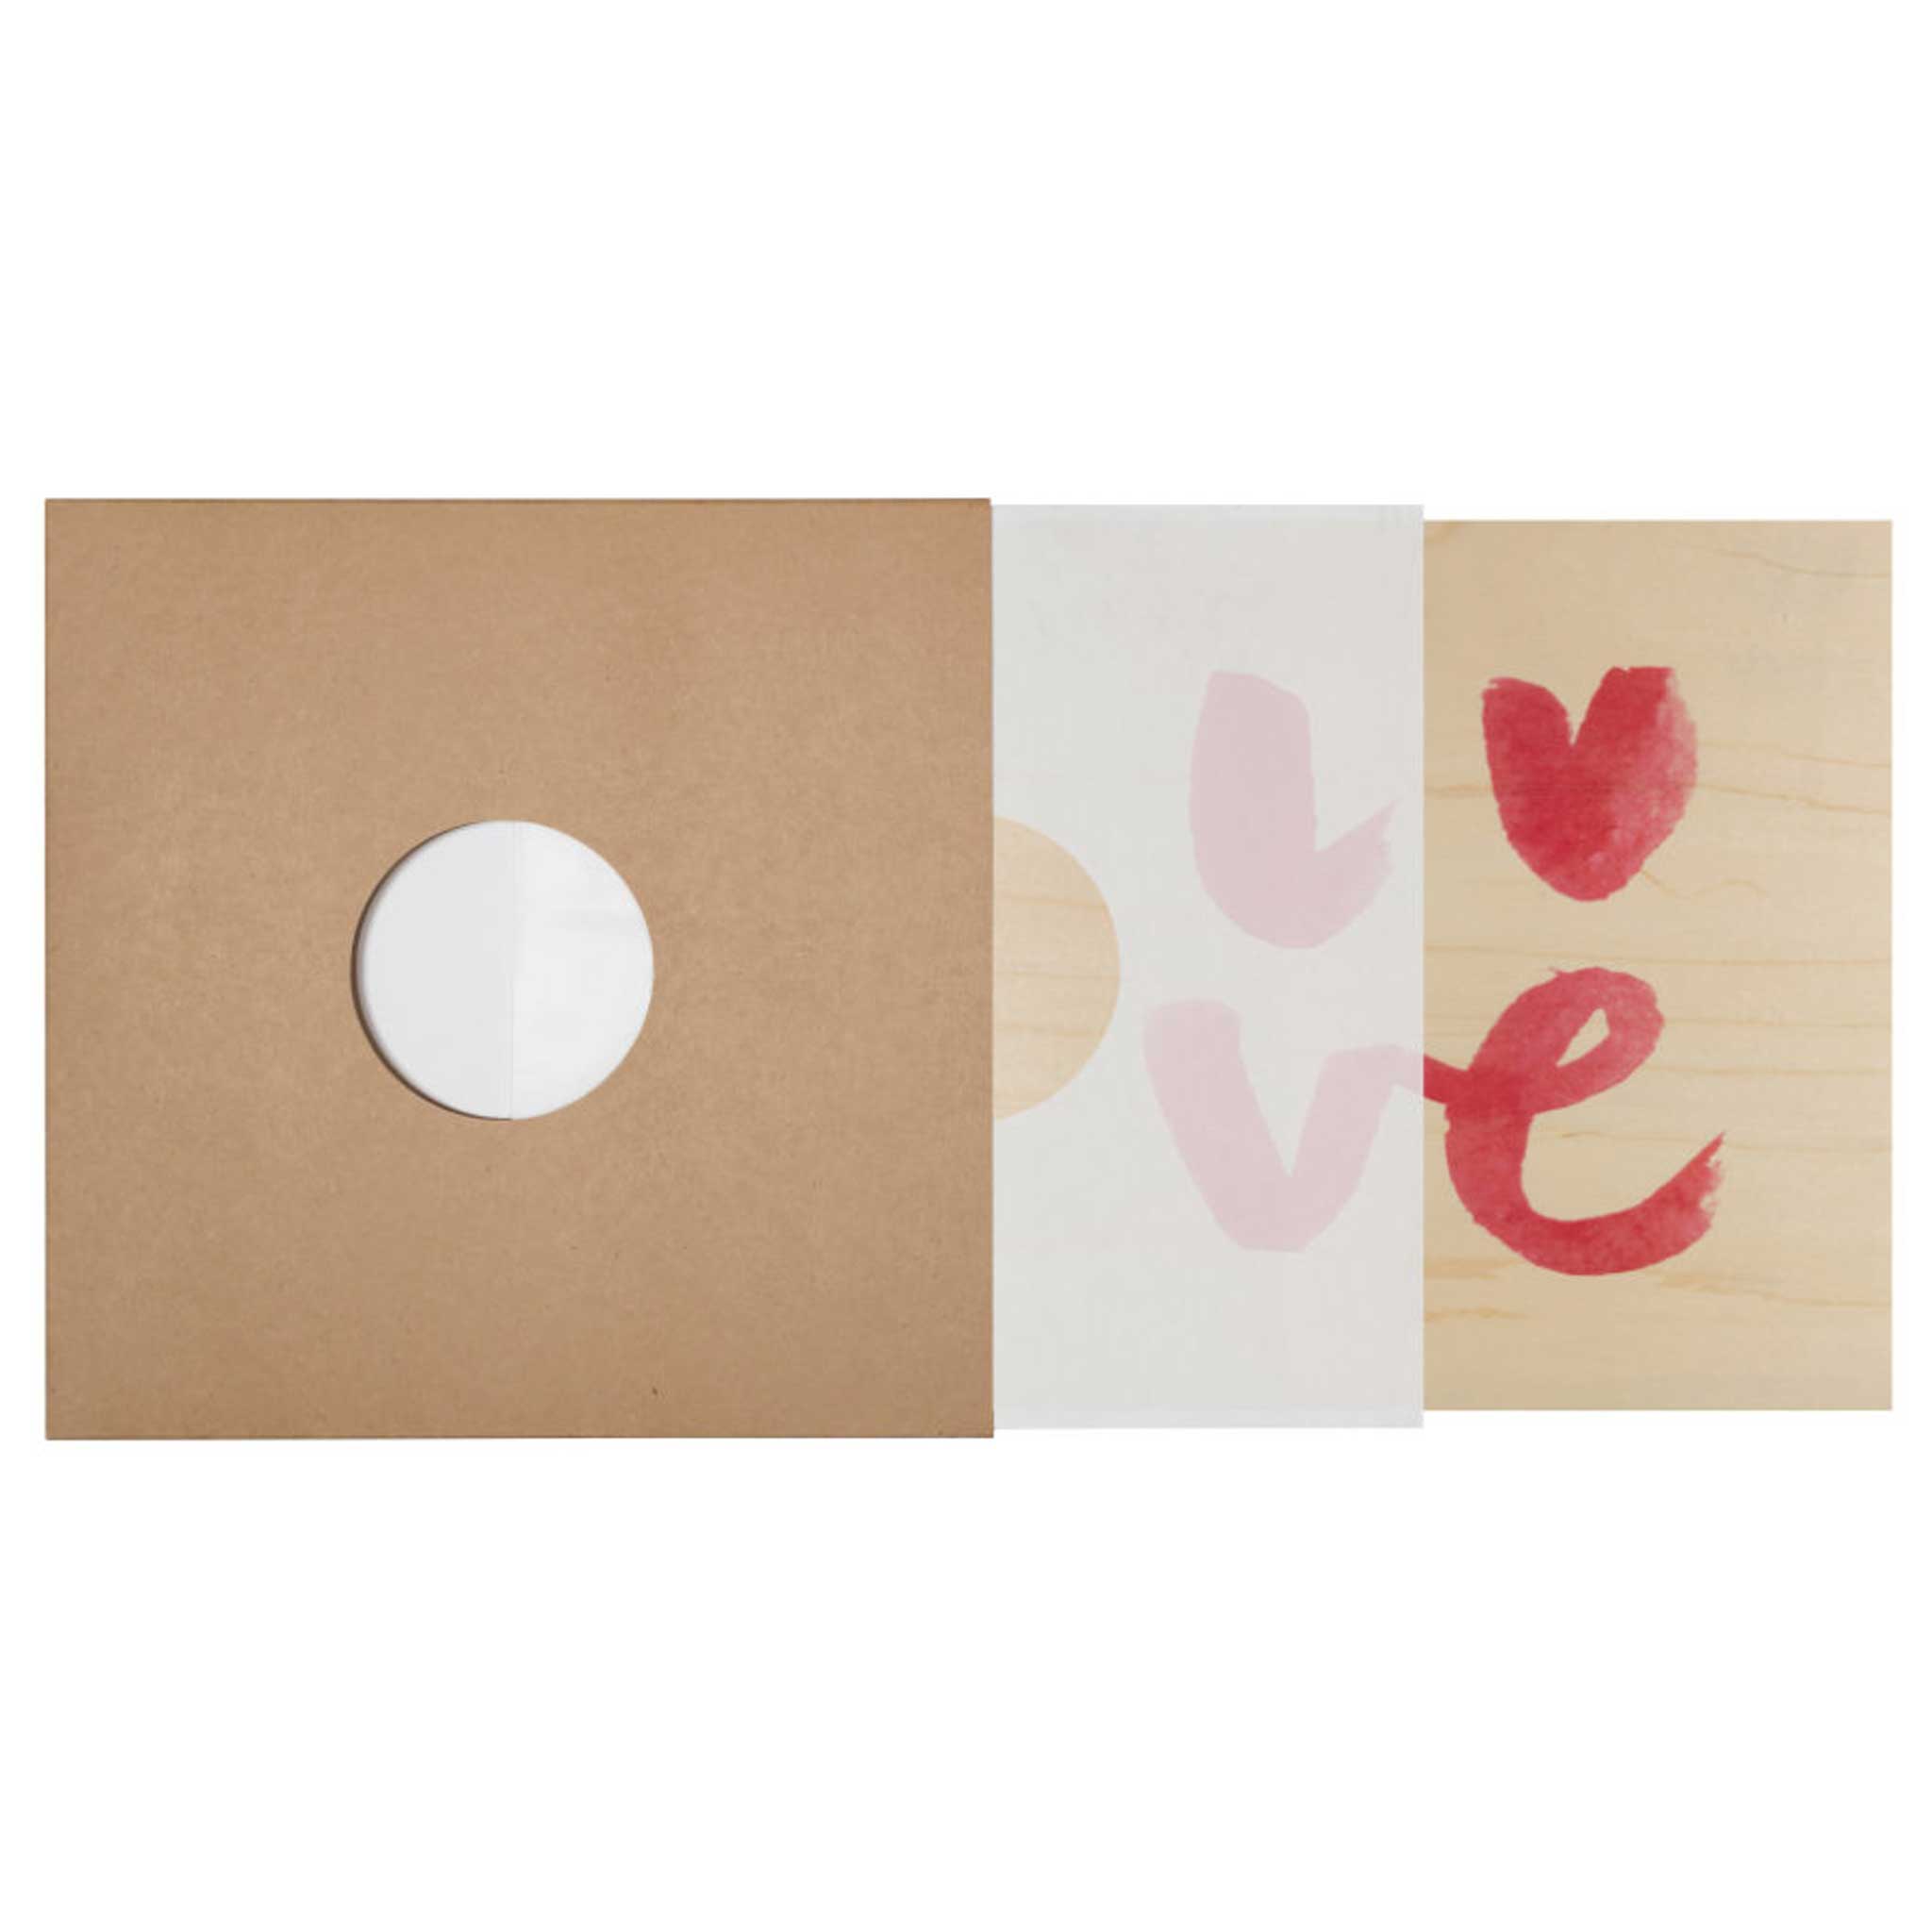 LOVE | POSTER aus Holz | 30x30 cm | Woodhi - Charles & Marie